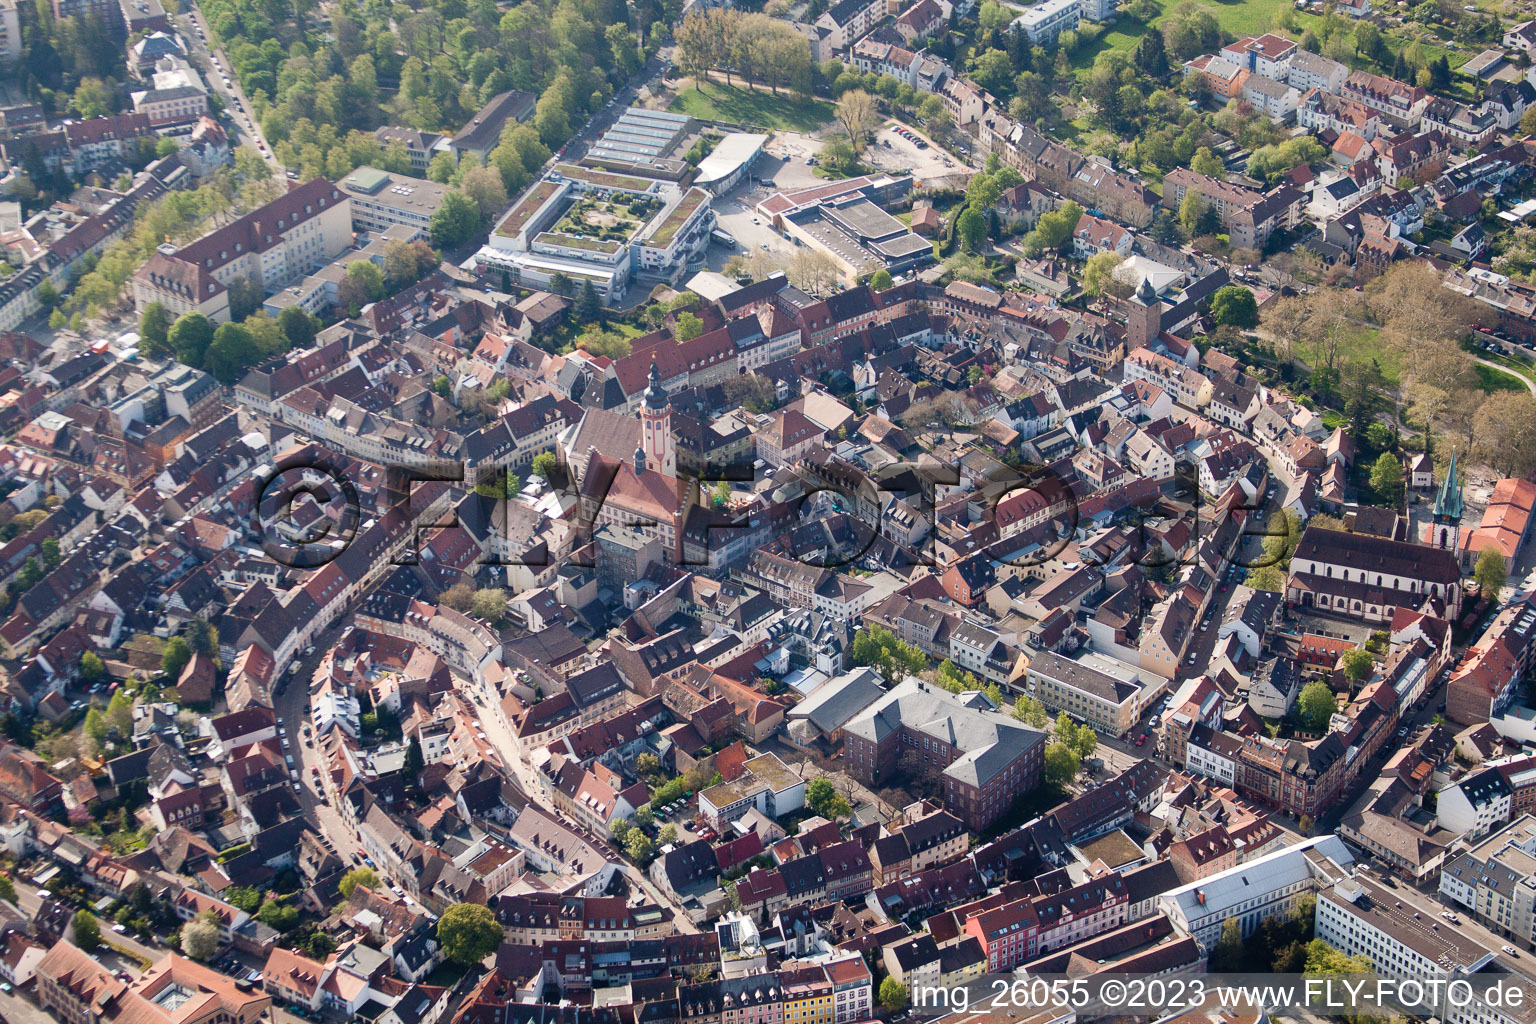 Old town in the district Durlach in Karlsruhe in the state Baden-Wuerttemberg, Germany